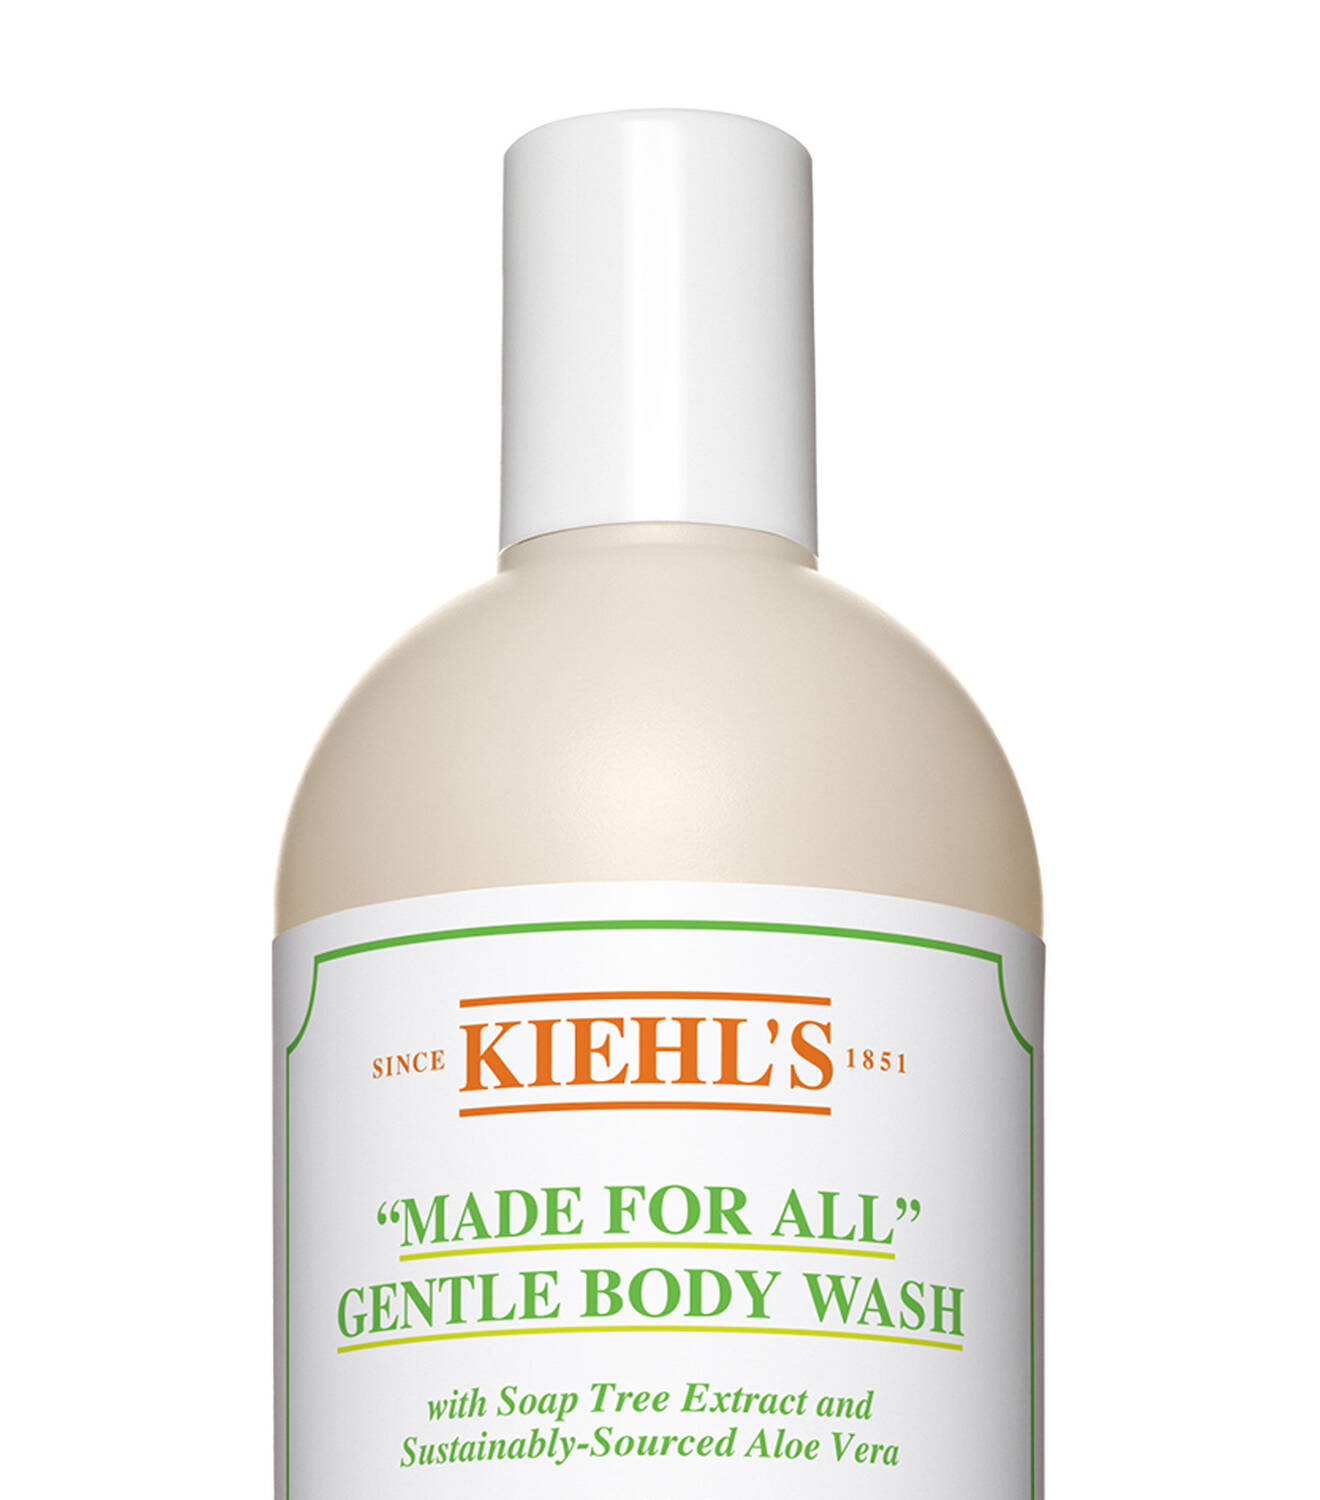 “Made for All” Gentle Body Wash